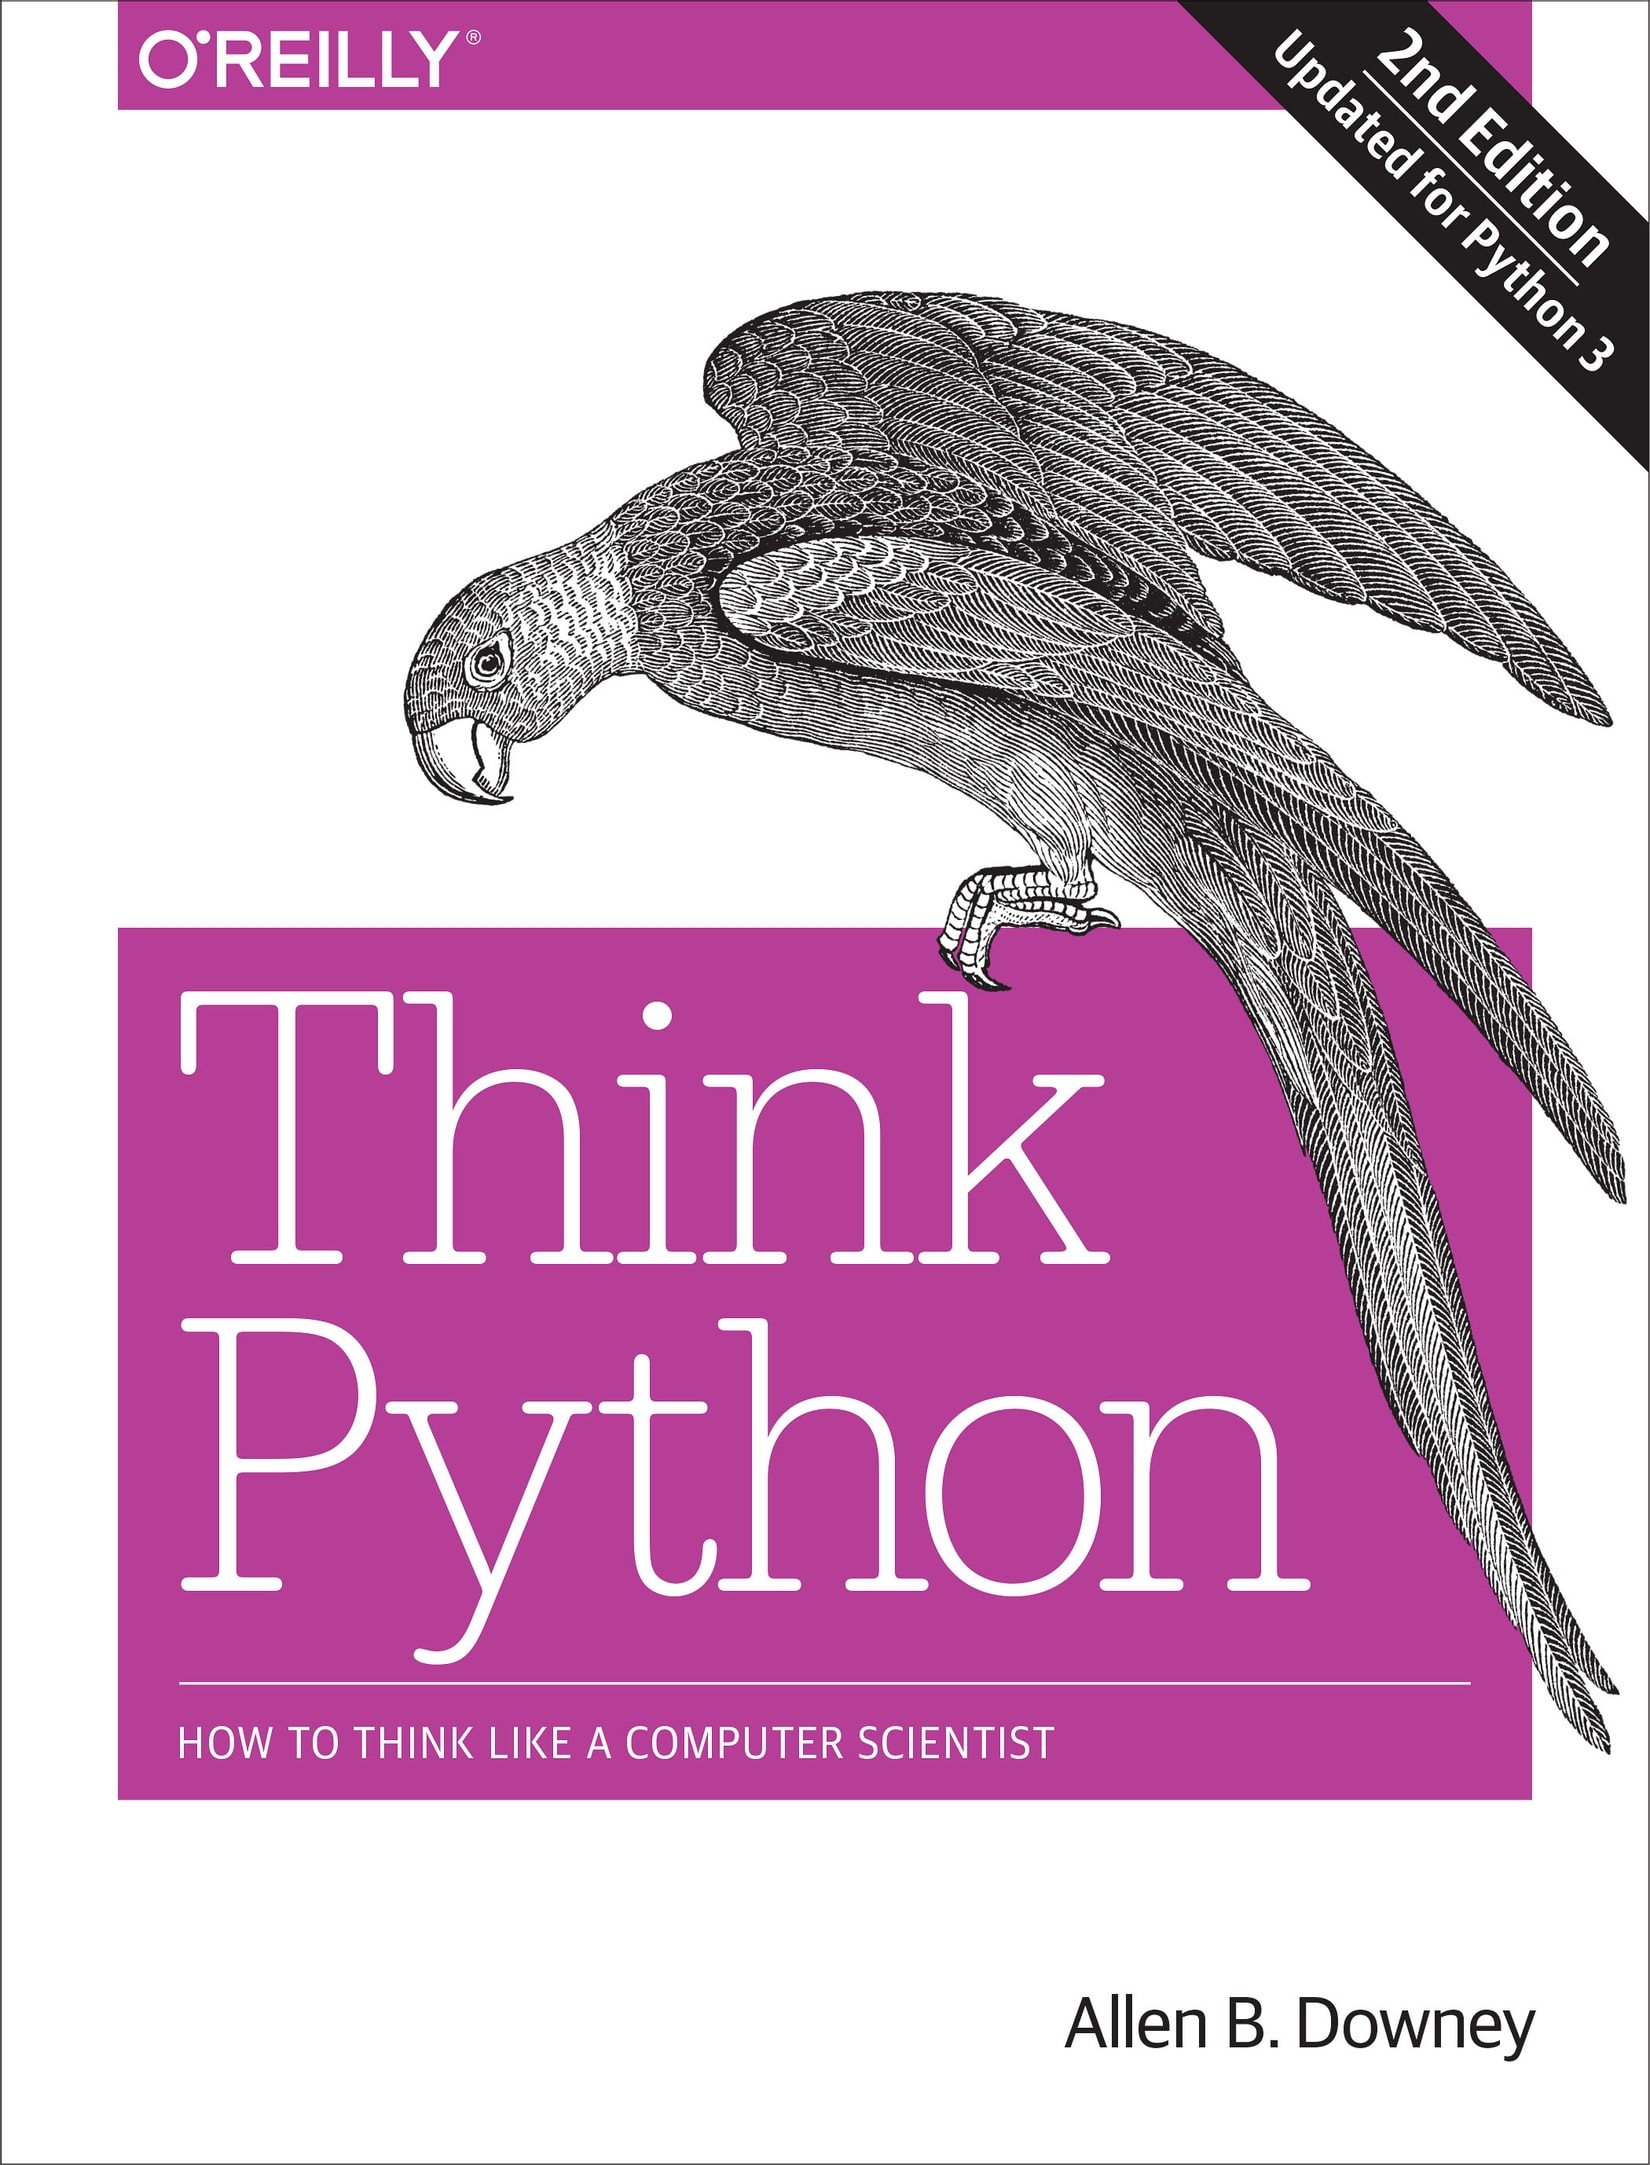 Think Python: How to Think Like a Computer Scientist 2nd Edition